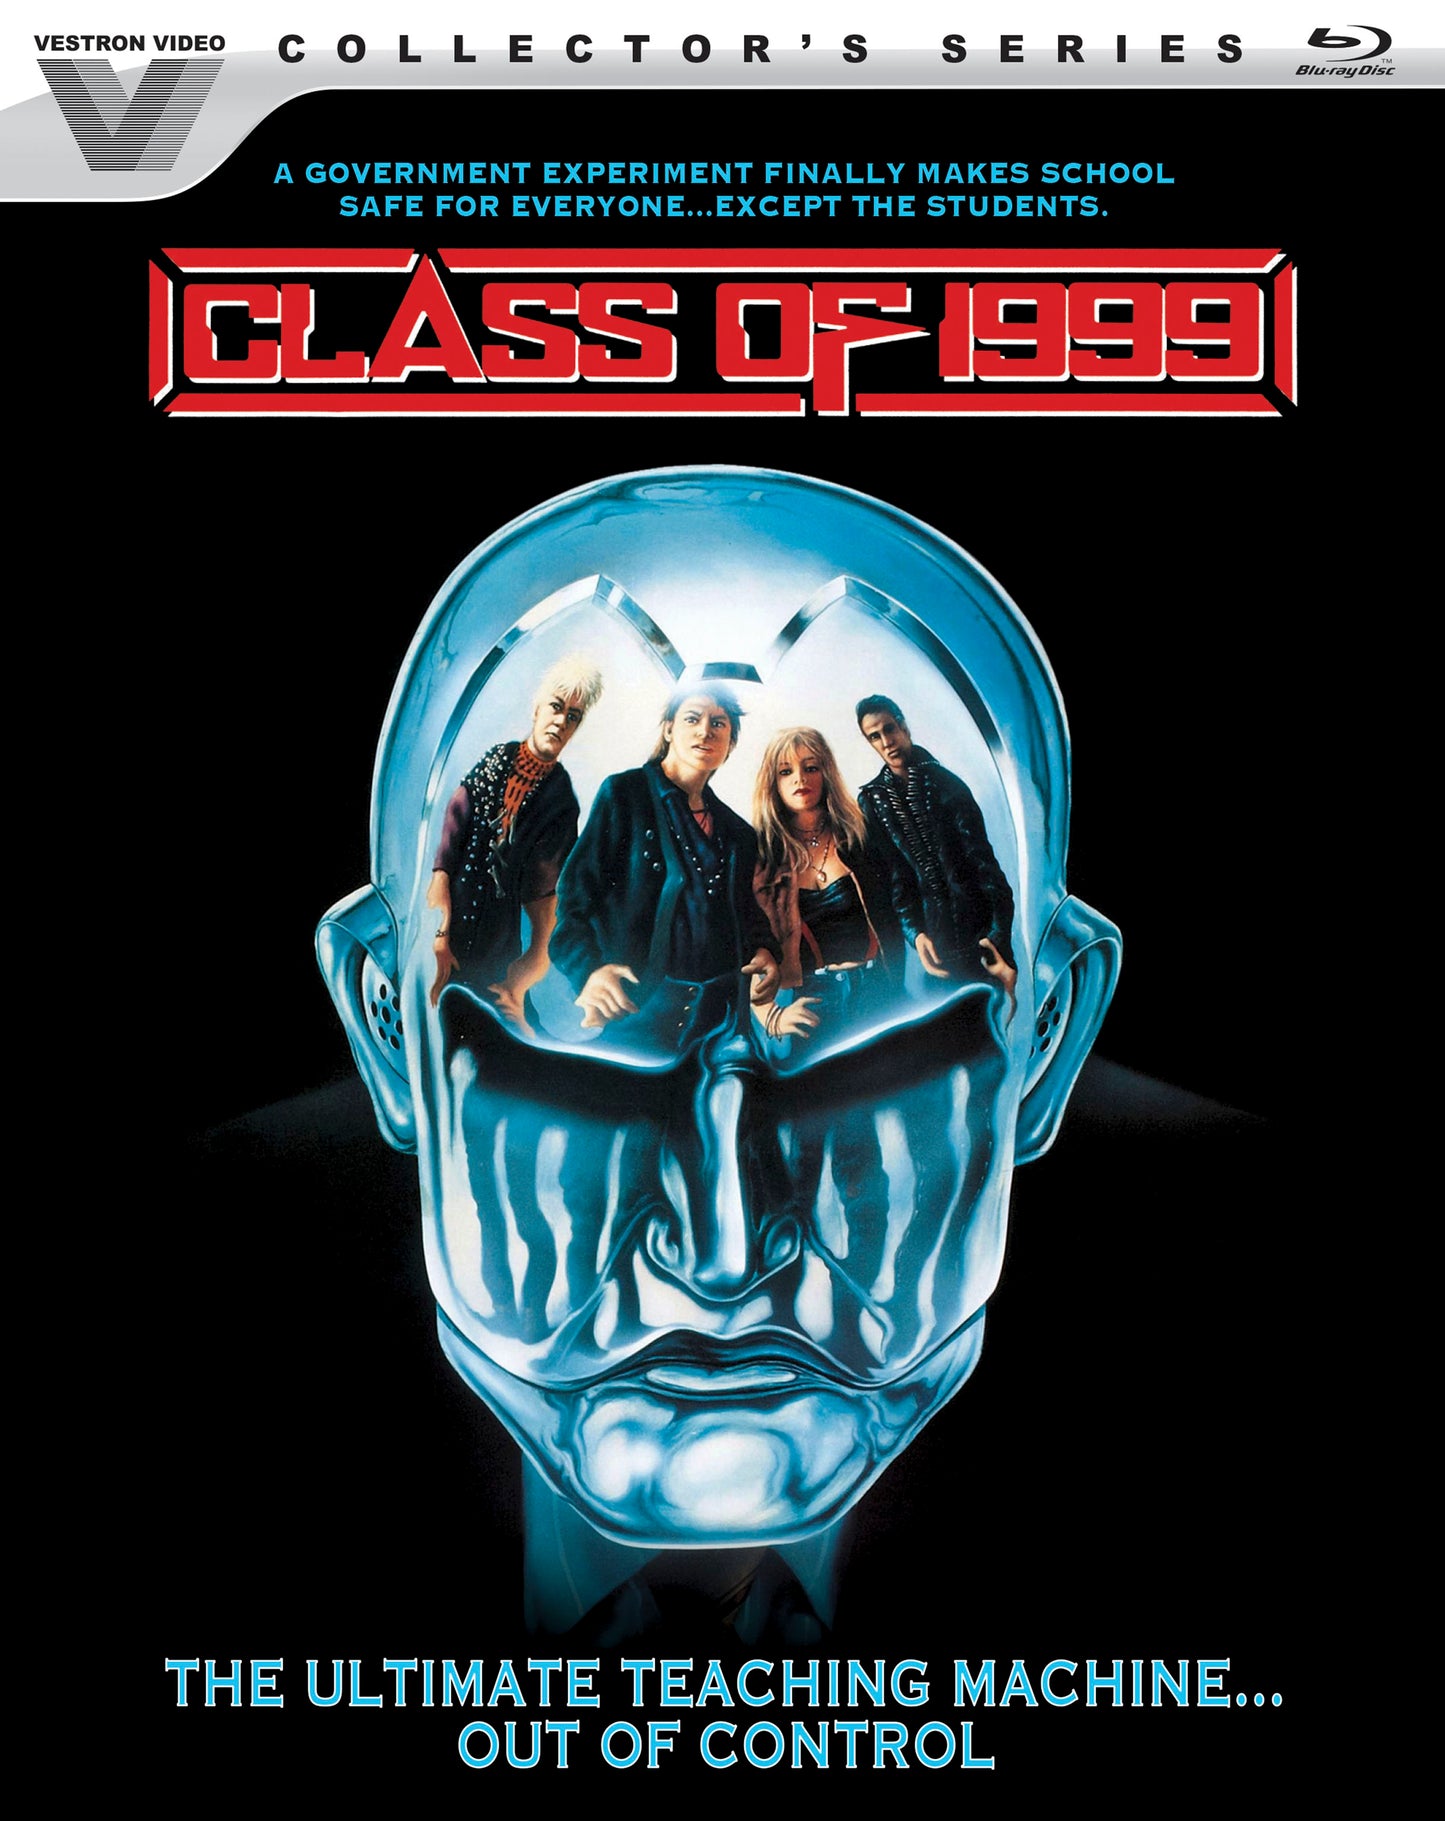 Class of 1999 [Blu-ray] cover art